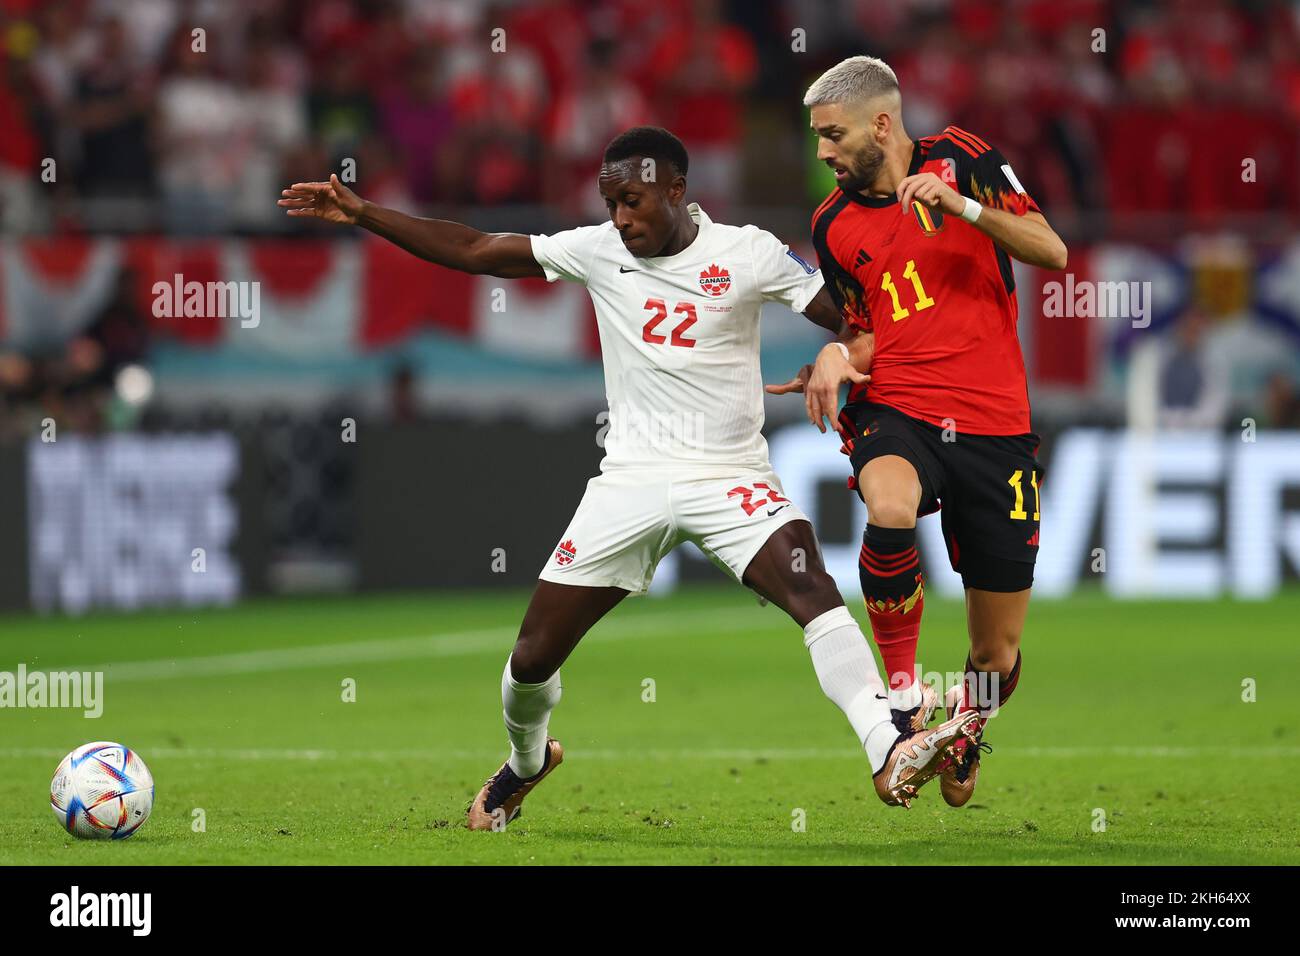 Doha, Qatar. 23rd Nov, 2022. Yannick Carrasco (R) of Belgium in action with Richie Laryea of Canada during the 2022 FIFA World Cup Group F match at the Ahmad Bin Ali Stadium in Doha, Qatar on November 23, 2022. Photo by Chris Brunskill/UPI Credit: UPI/Alamy Live News Stock Photo